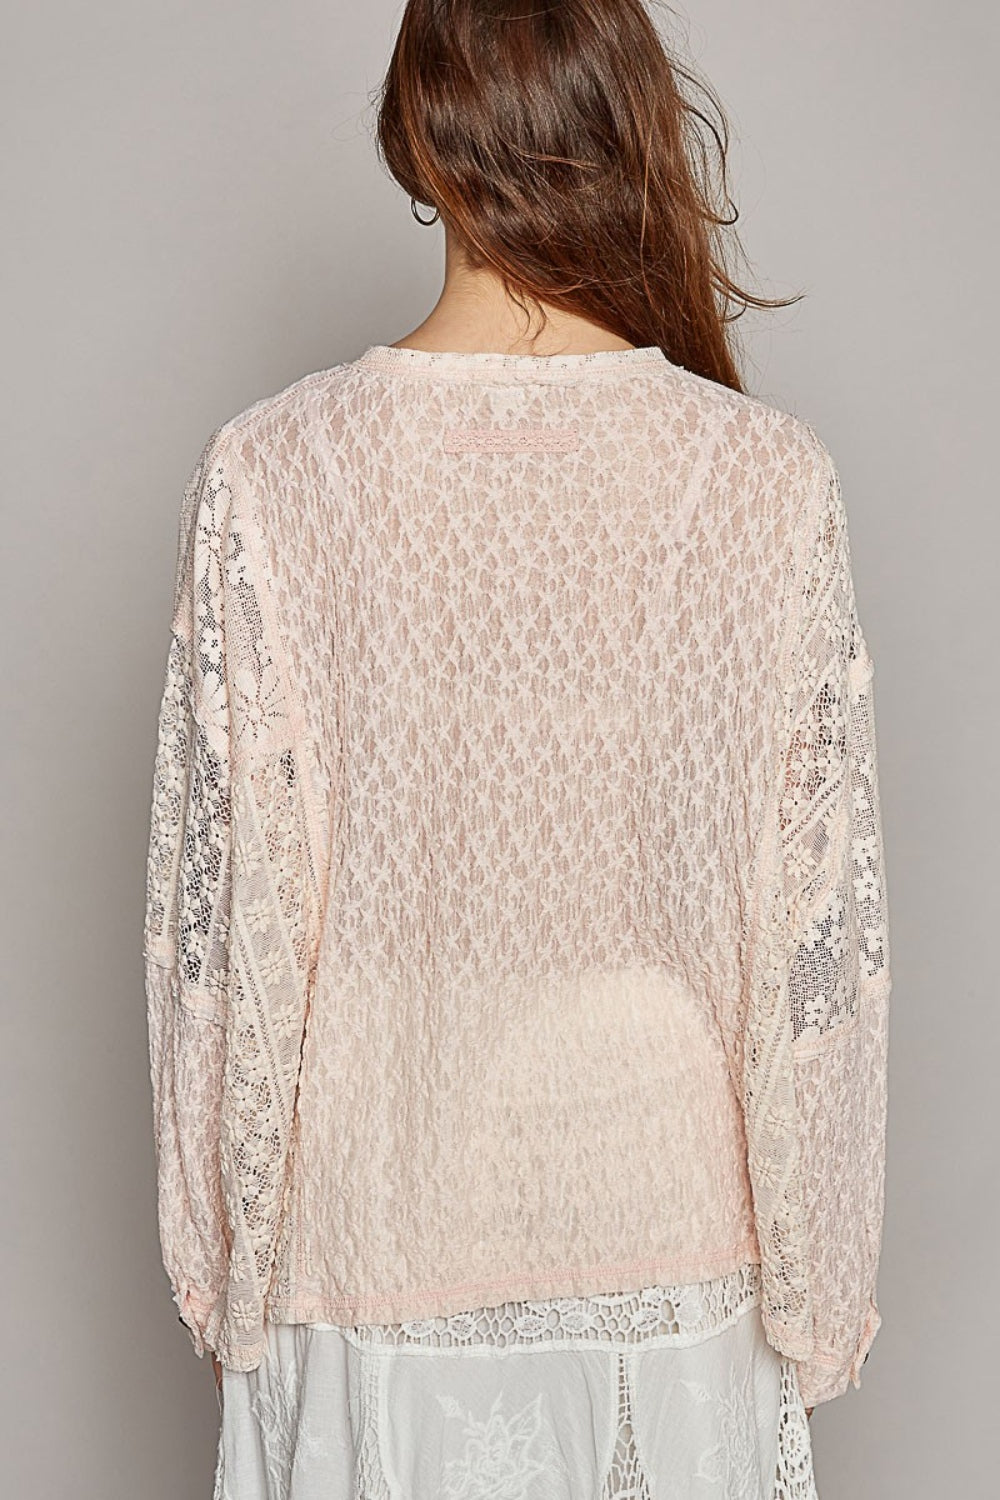 POL Round Neck Long Sleeve Raw Edge Lace Top - Three Bears Boutique